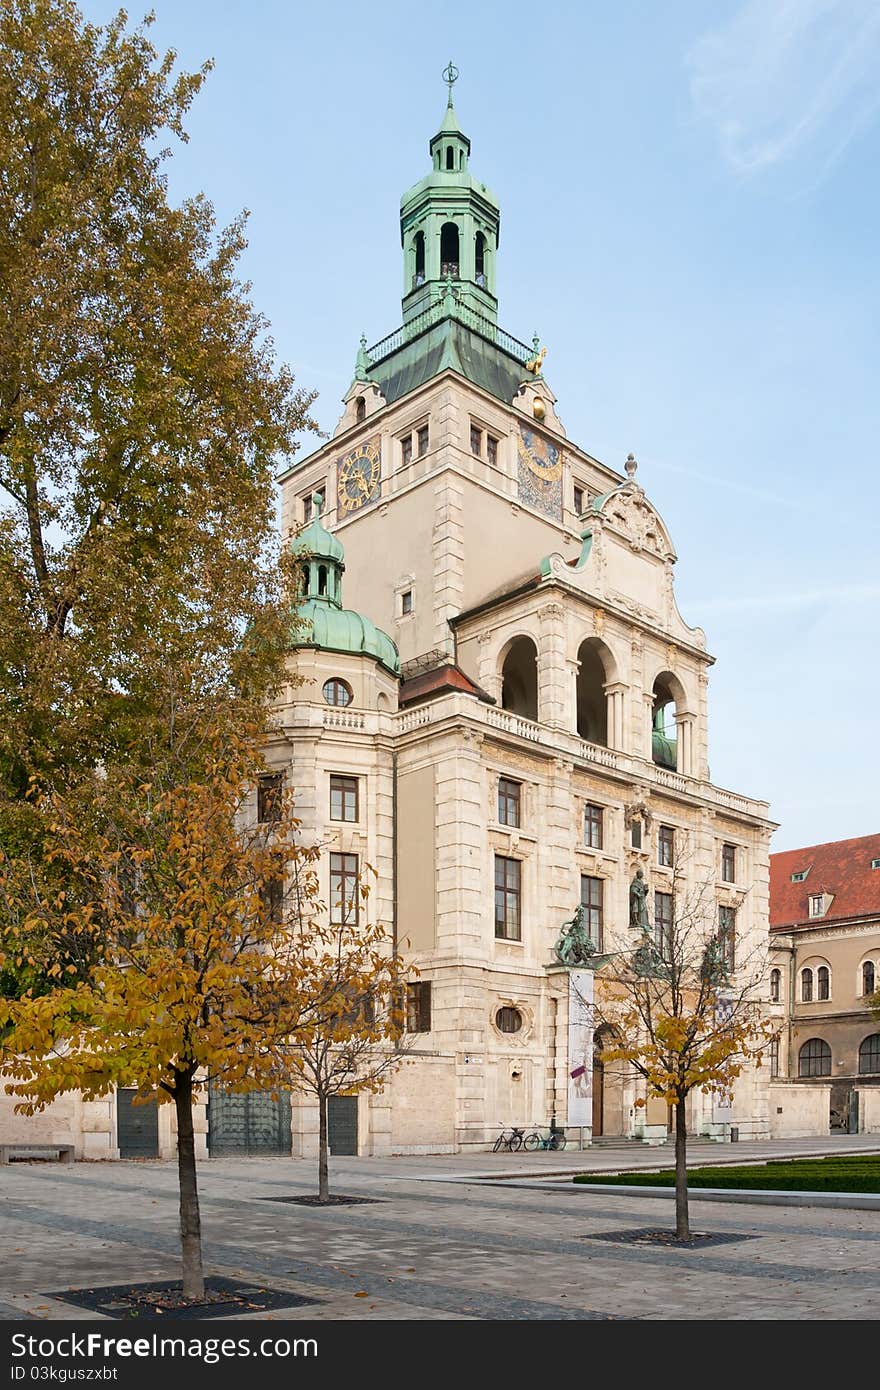 Bavarian National Museum builind in Minuch, Germany